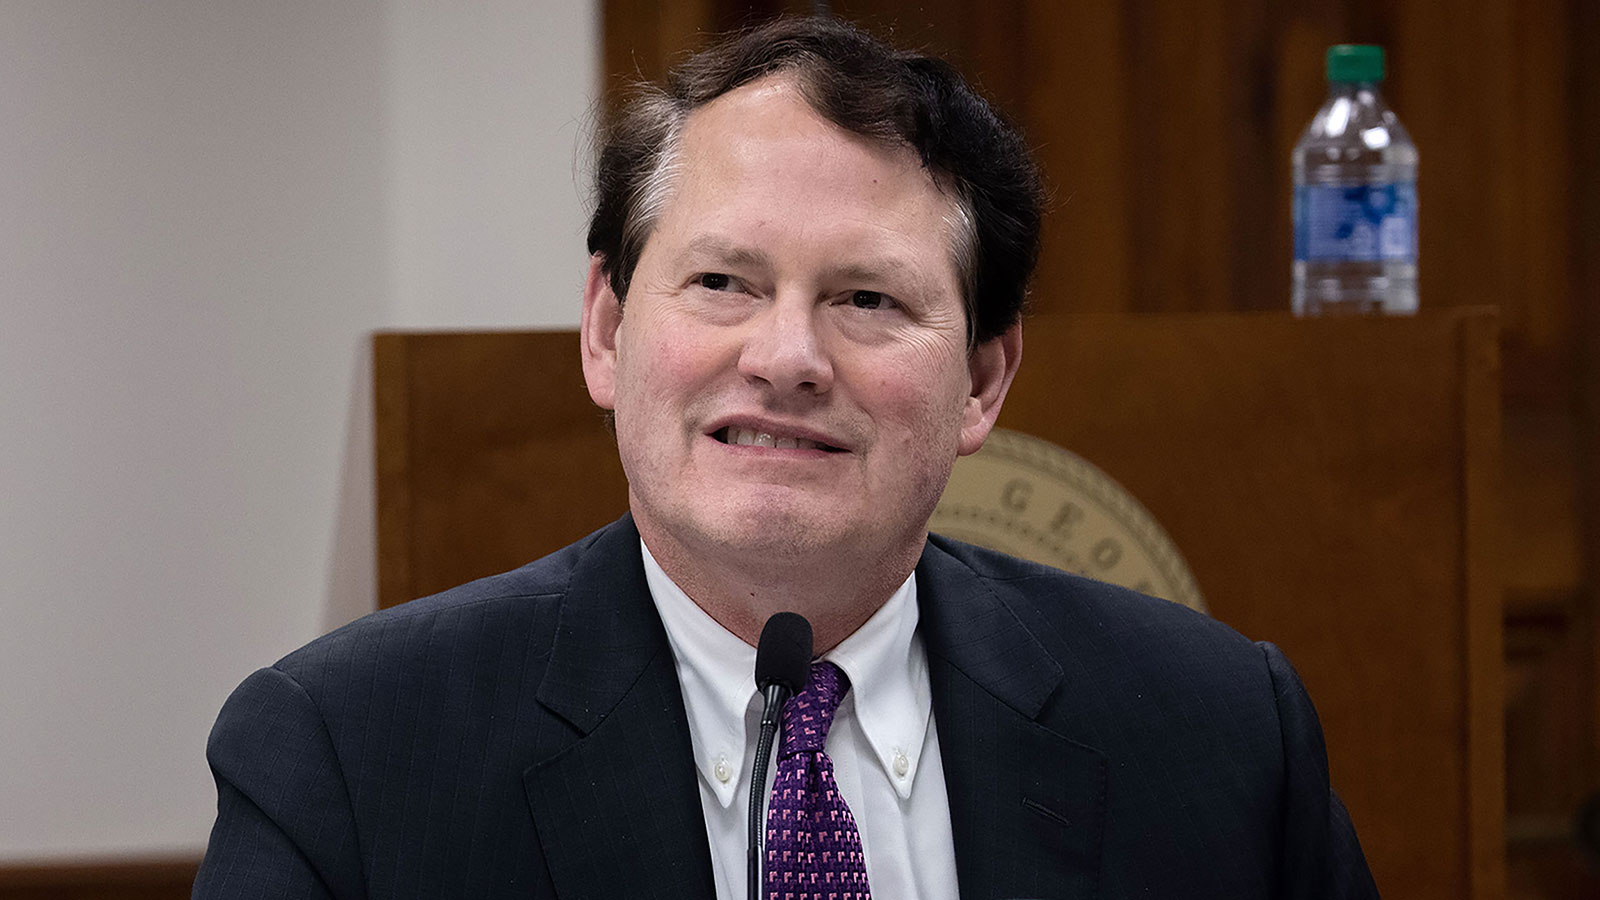 Smith is seen inside of the Georgia State Capitol in Atlanta, Georgia during an election hearing on December 3, 2020.